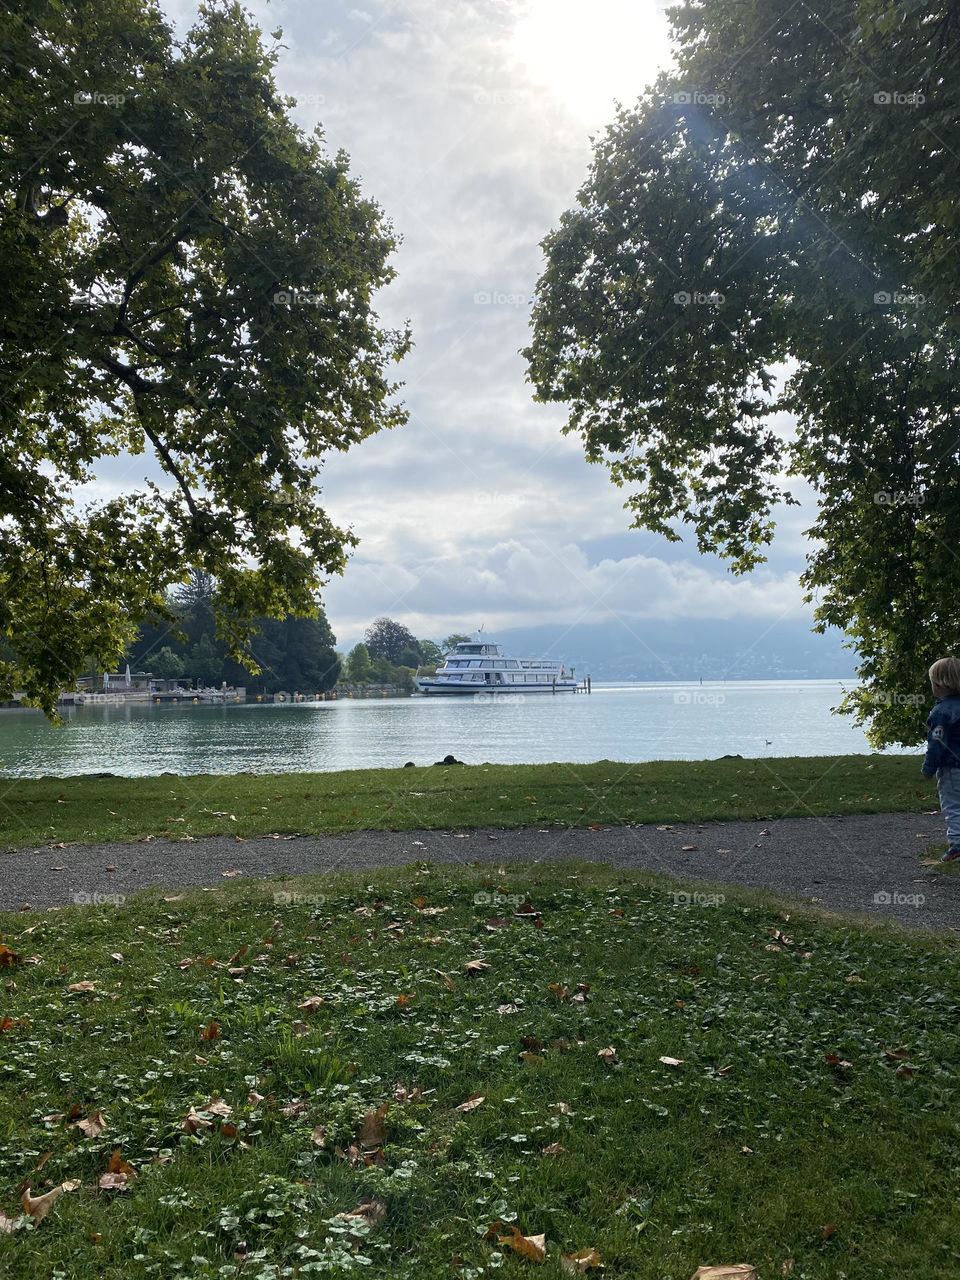 beautiful Swiss landscapes of a Swiss lake with the Alps and a ship on the water.  autumn is coming